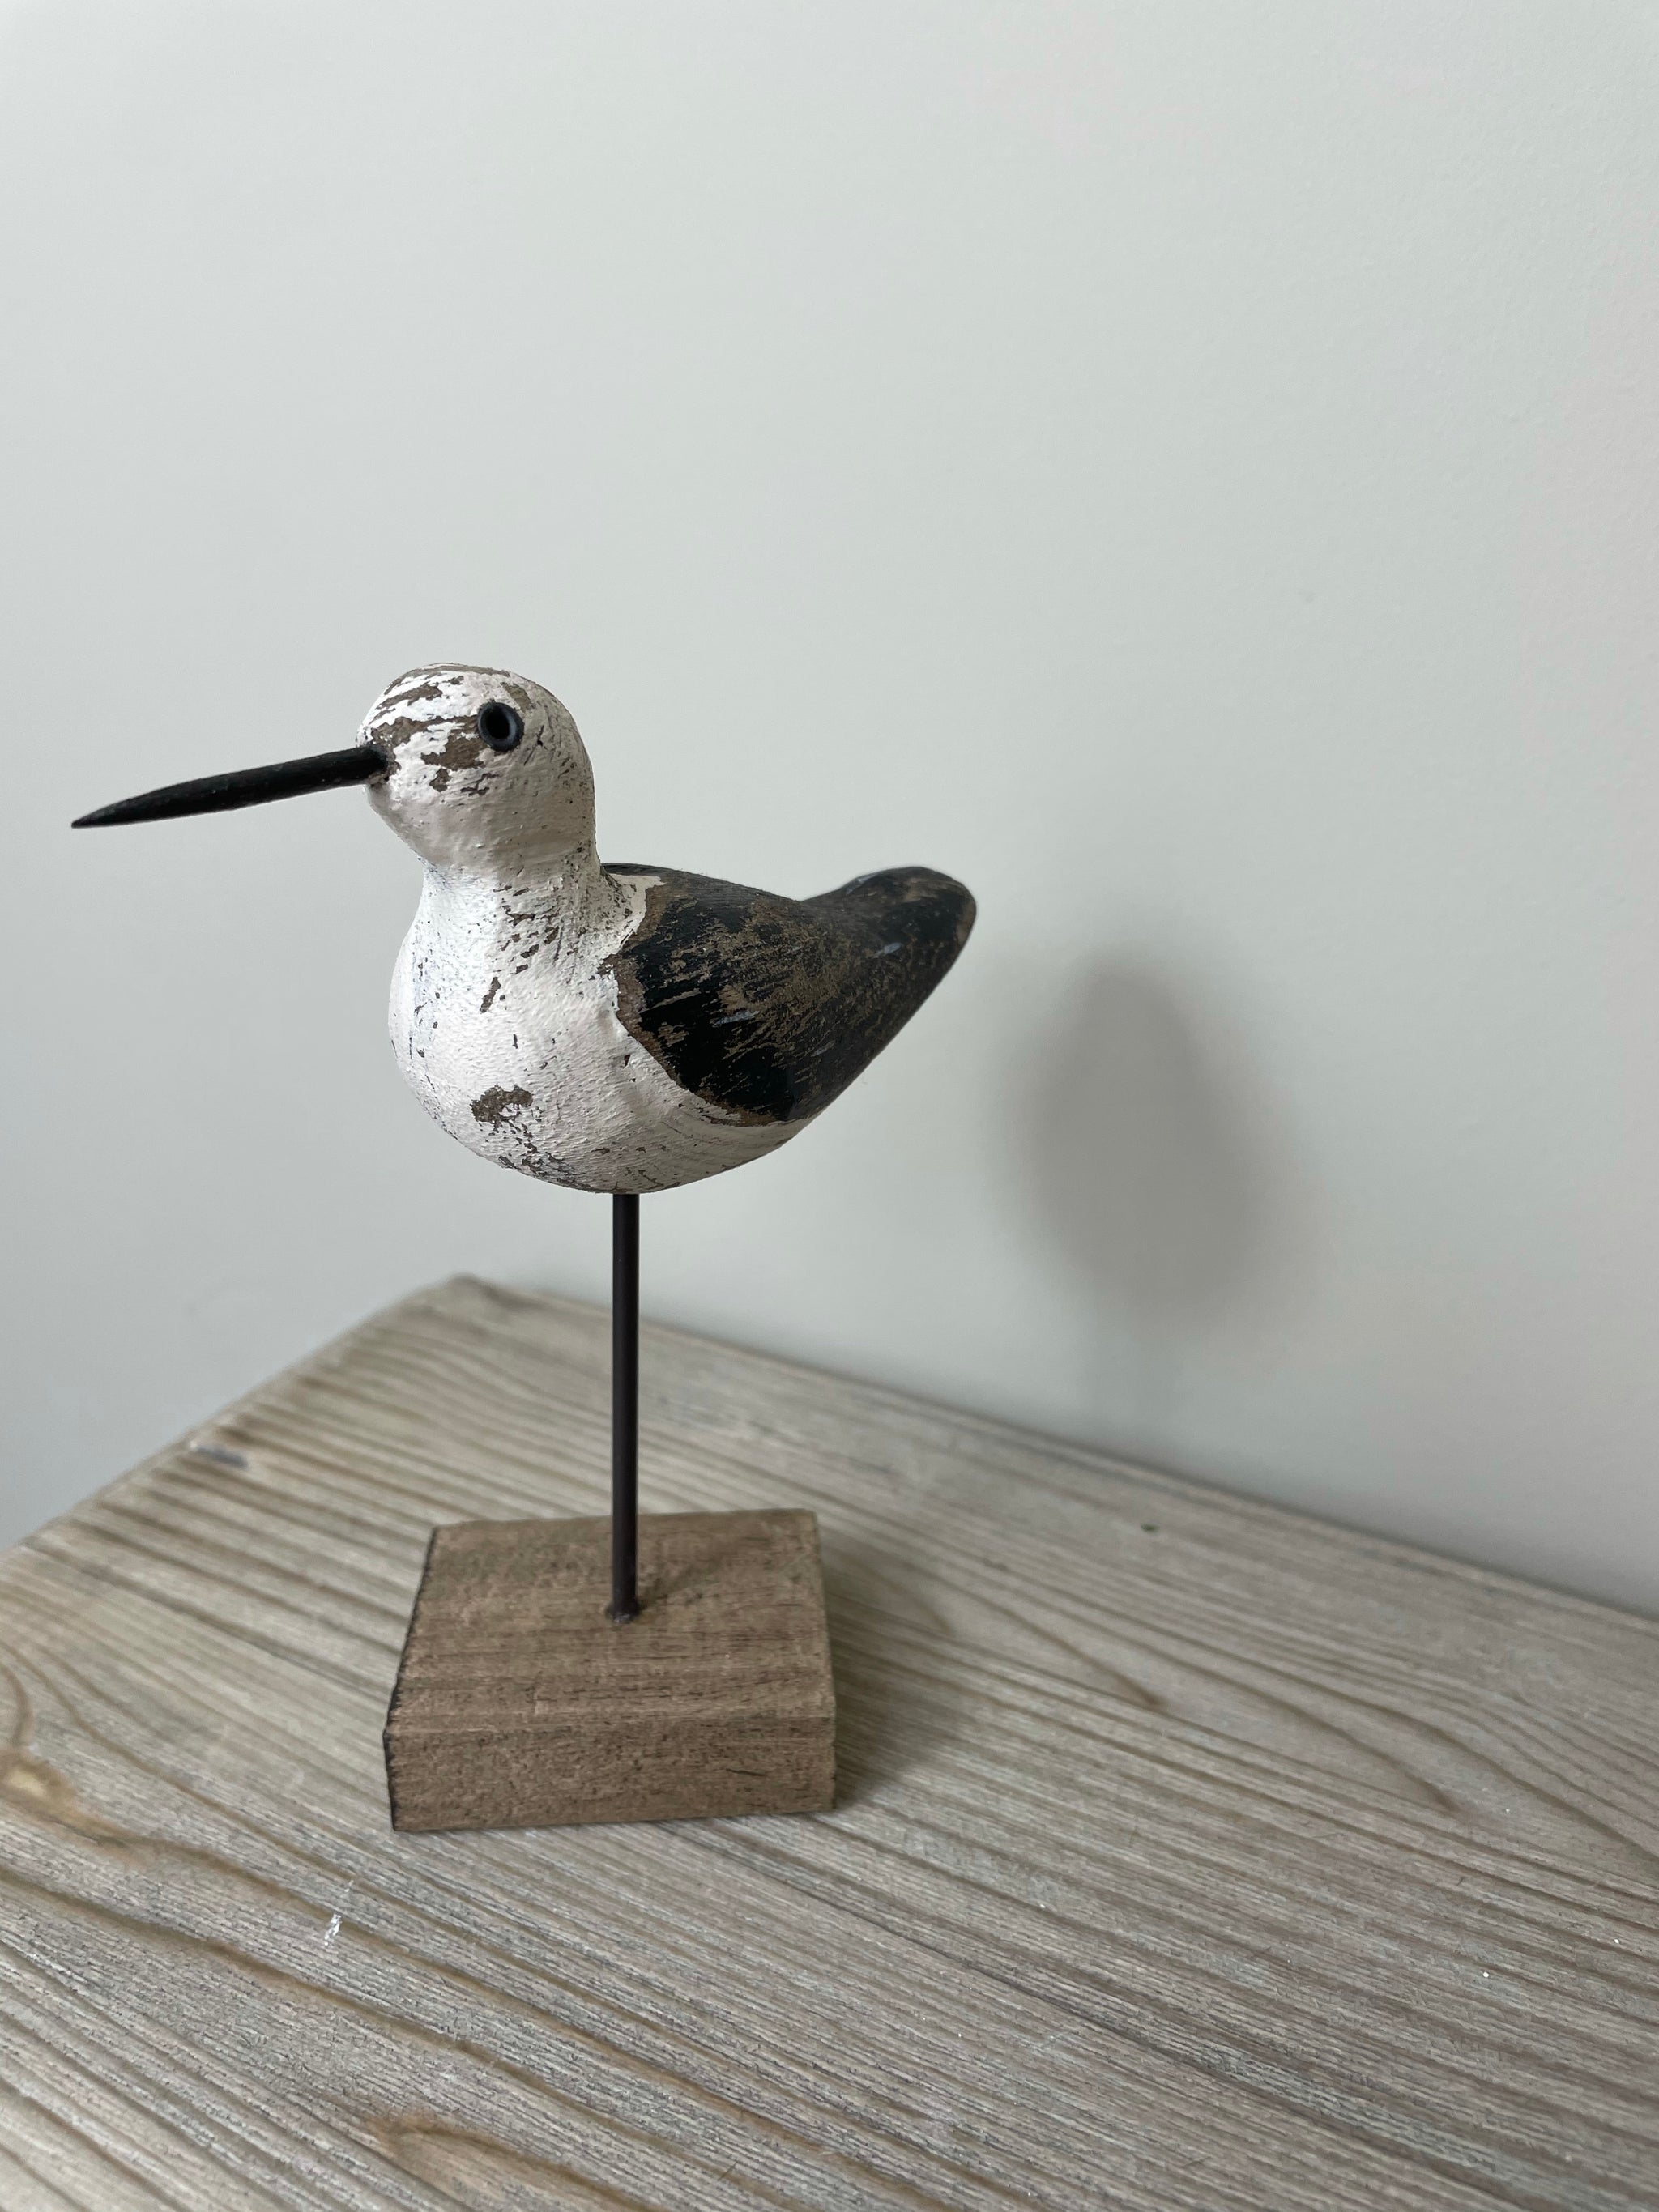 Small sandpiper on wooden base